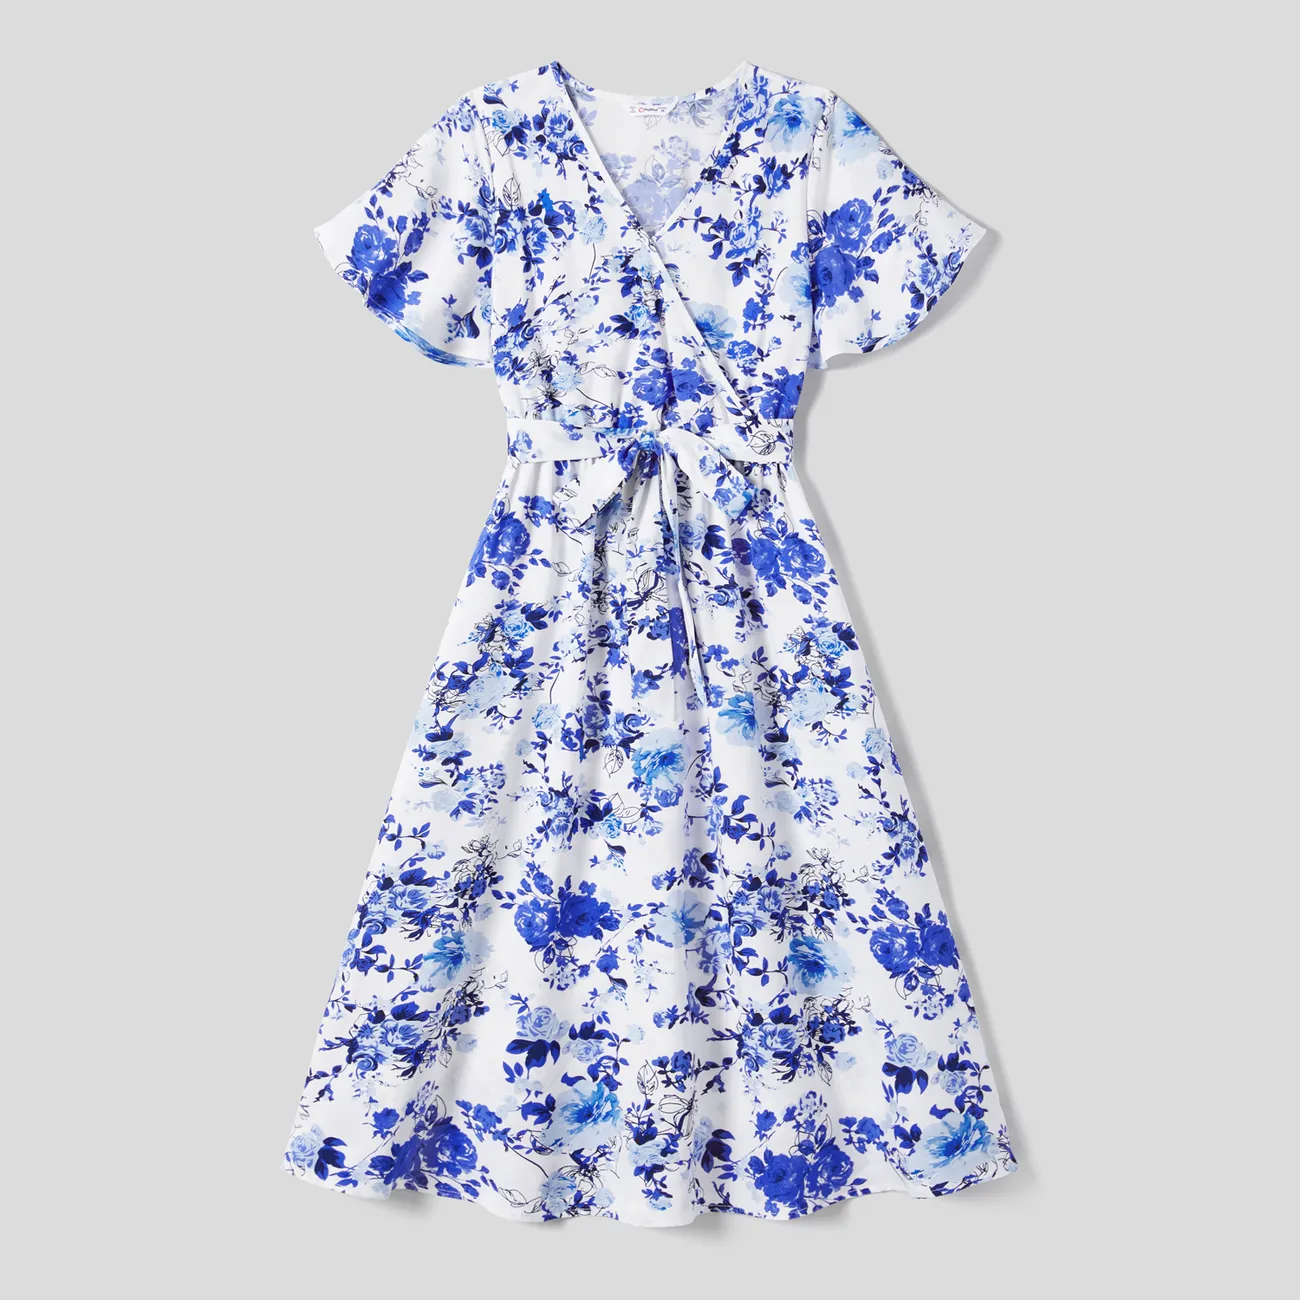 Family Matching Allover Floral Print Belted Short-sleeve Dresses and Shirts Sets Blue big image 1